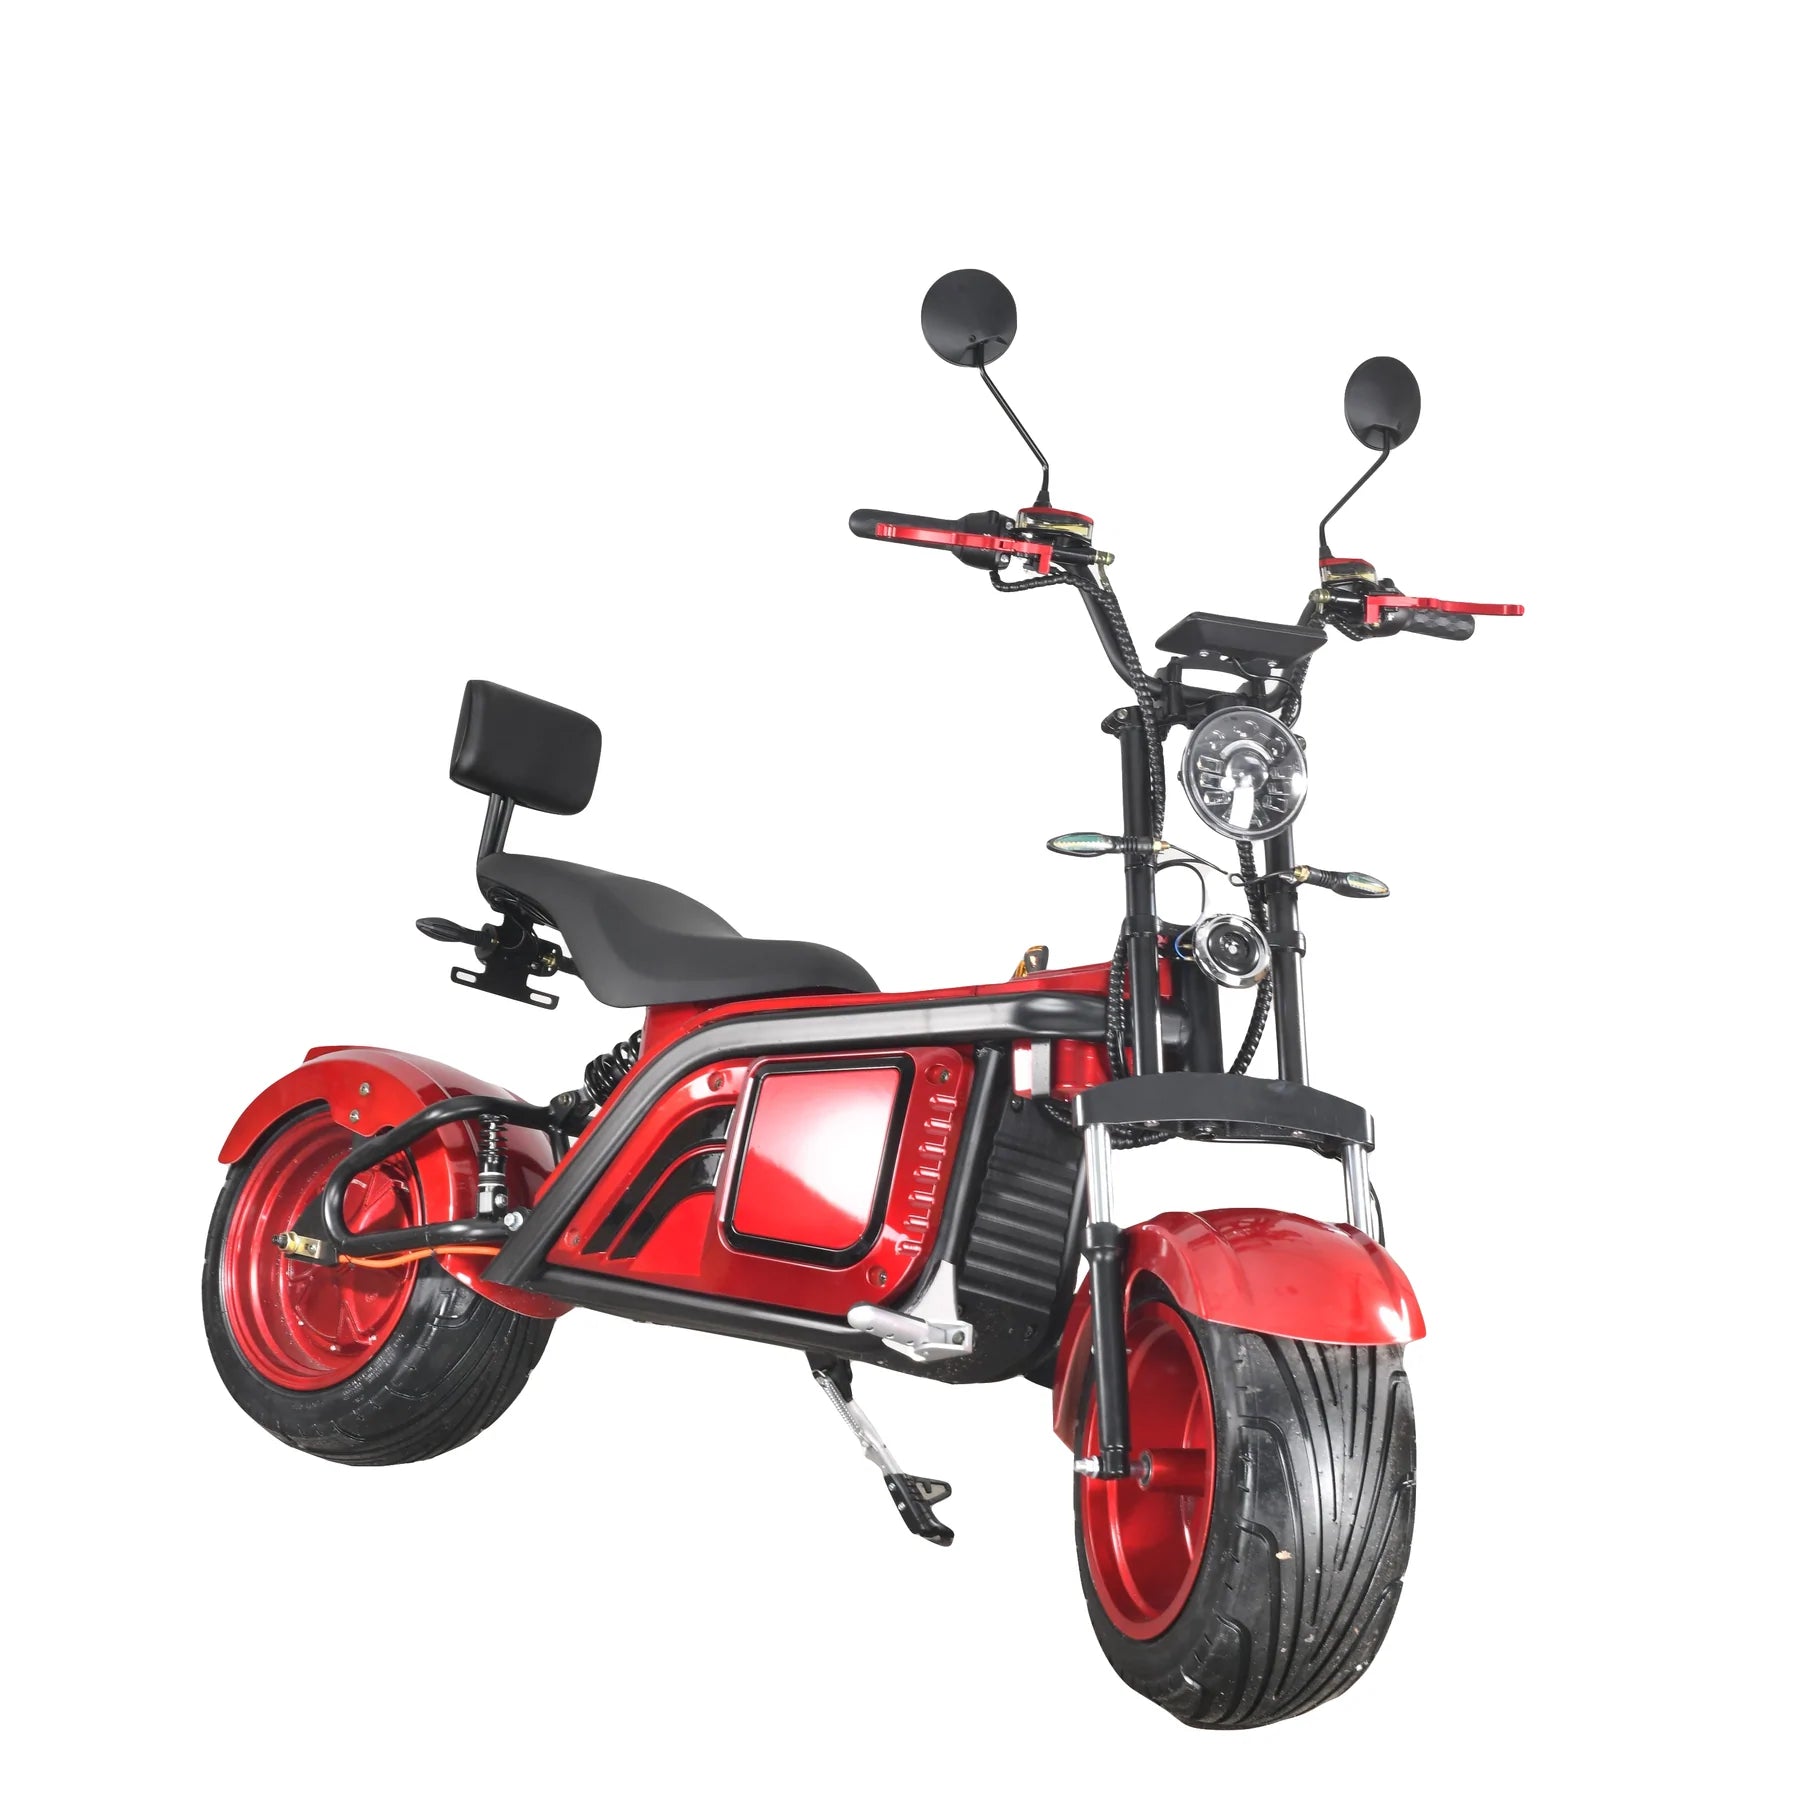 Soversky M9 Electric Motorcycle Scooter